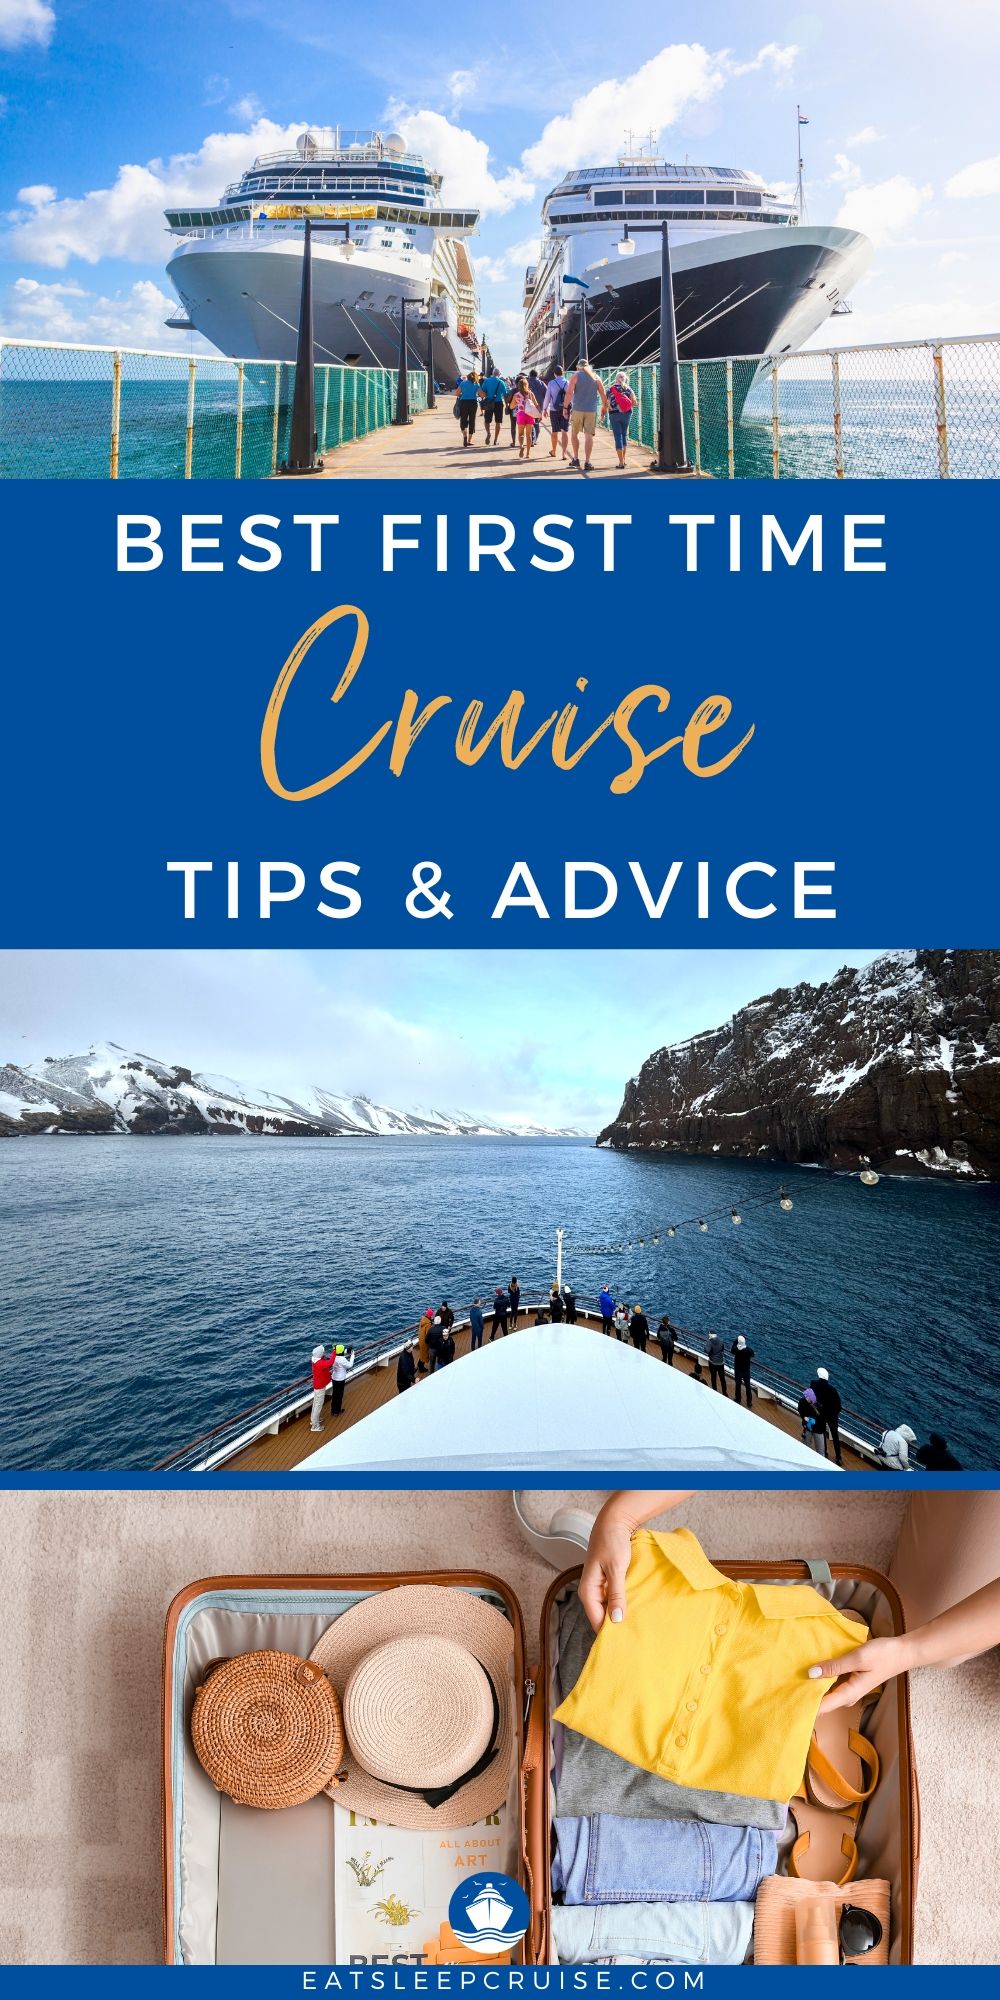 We Show You How to Have the Best First Time Cruise